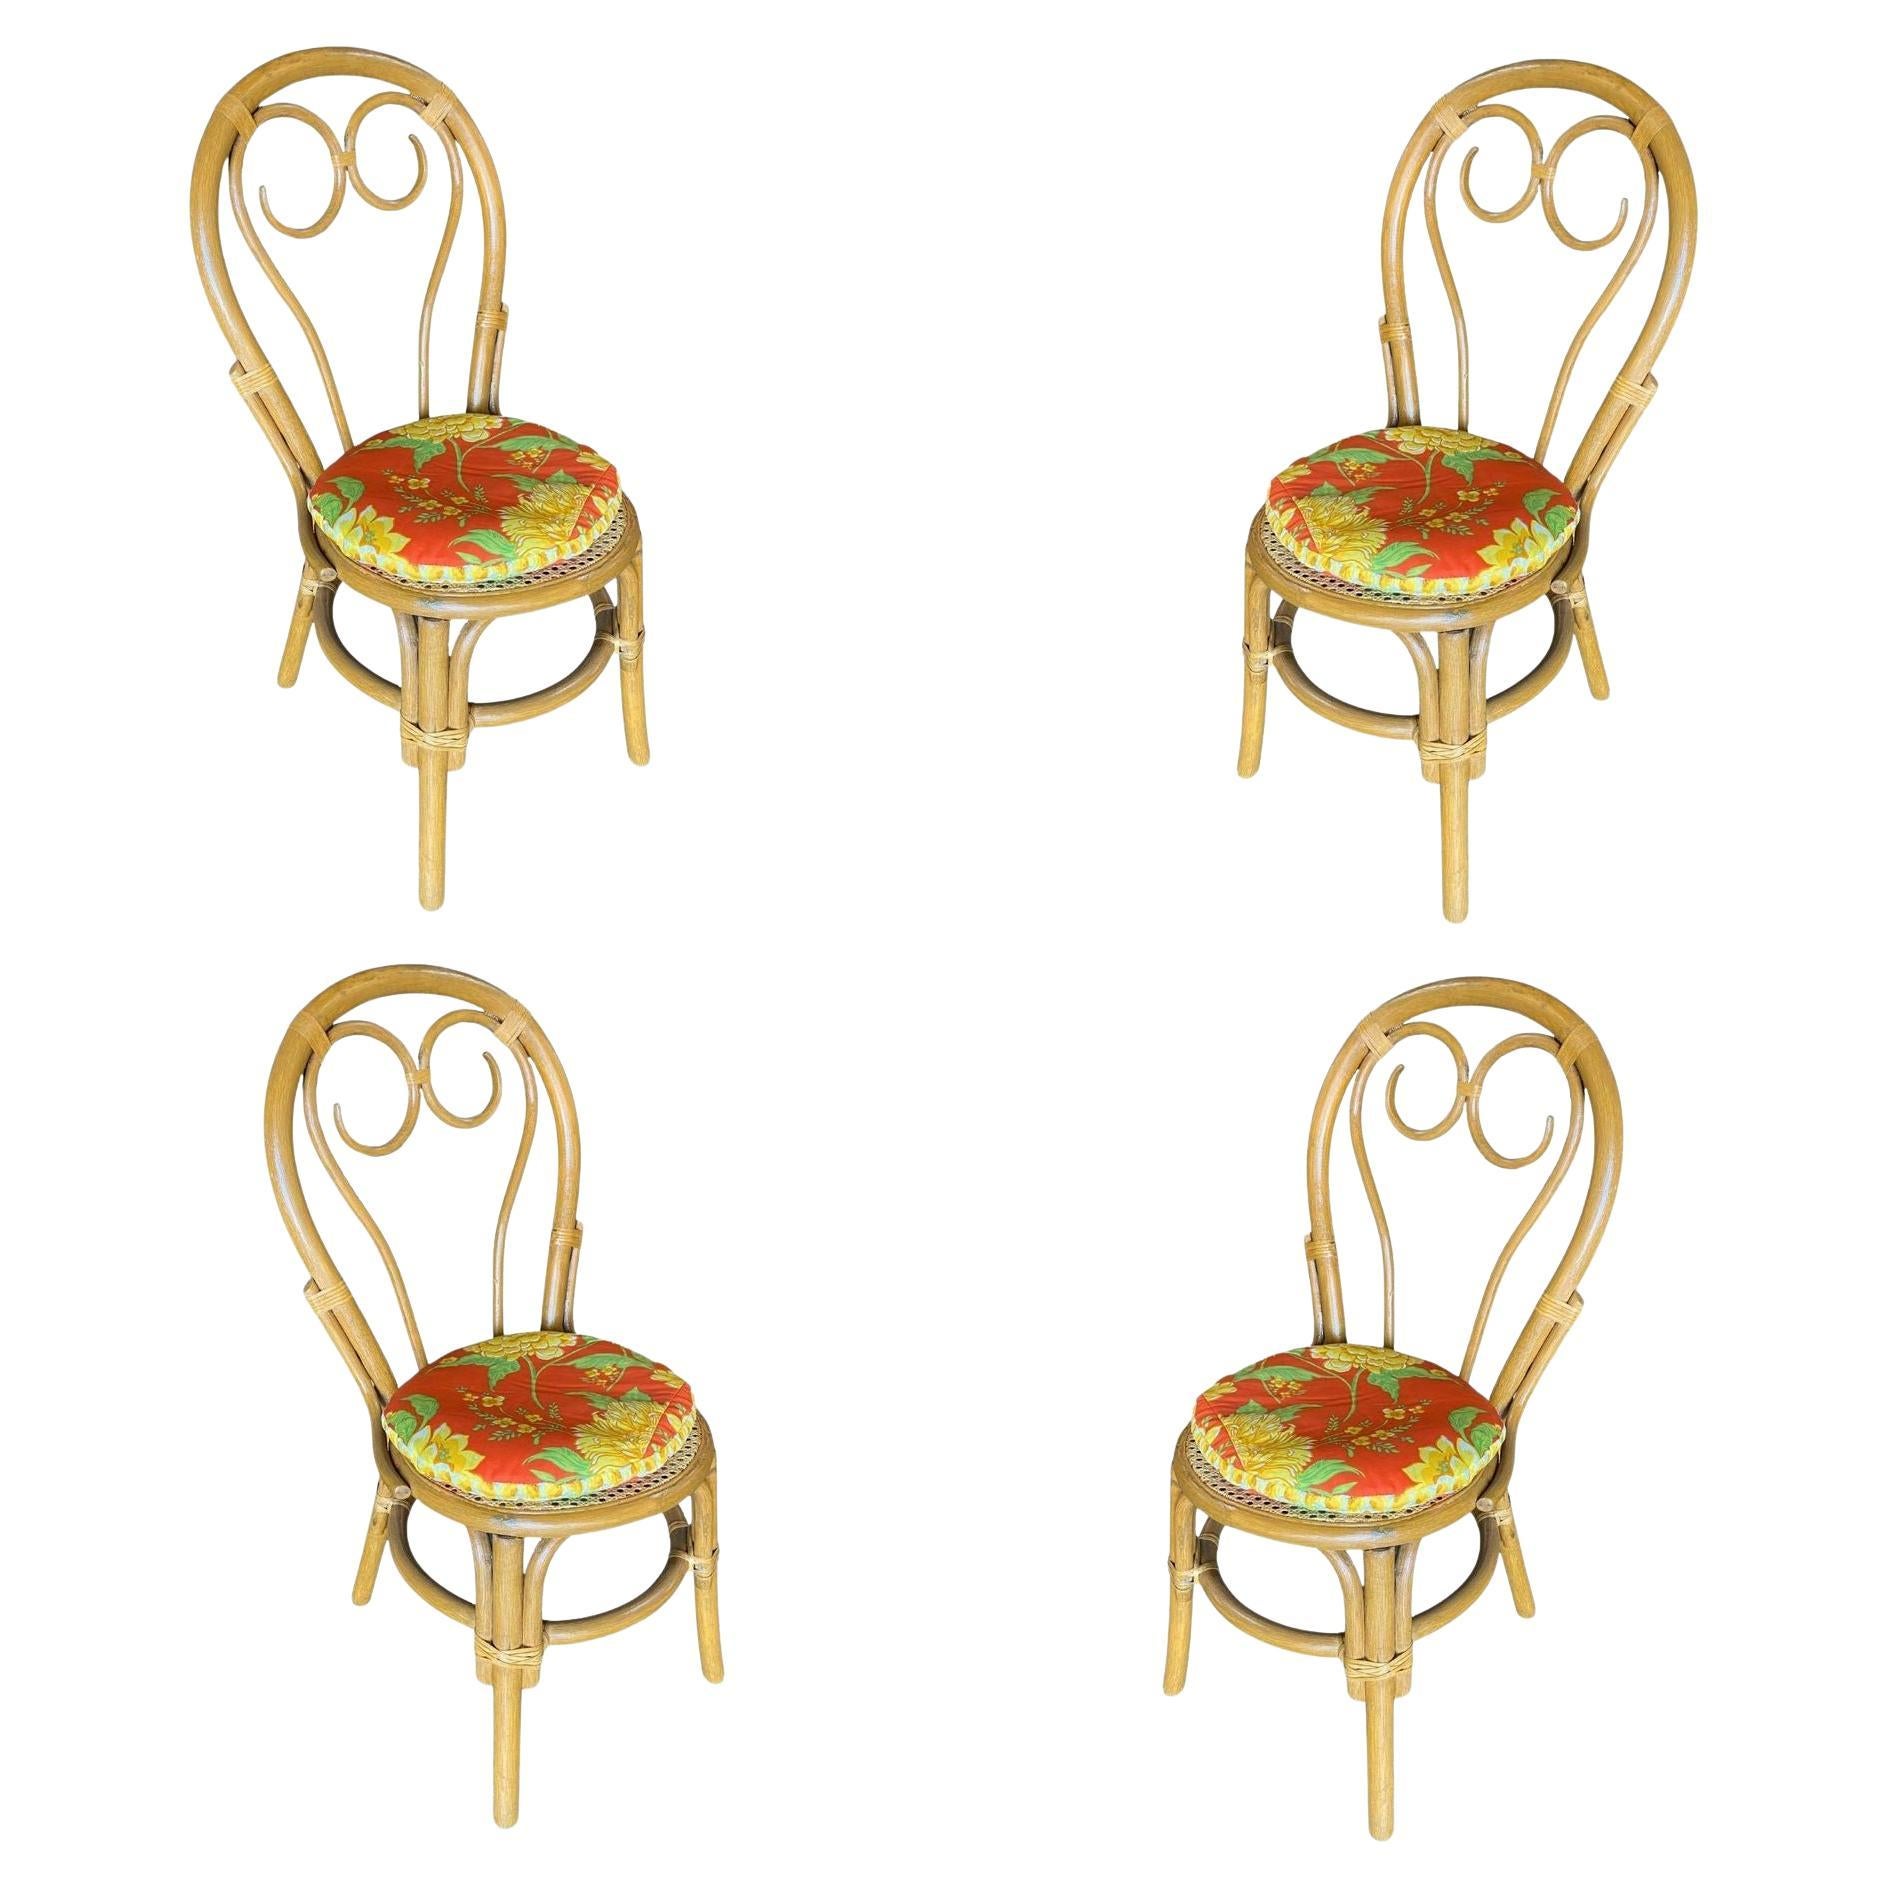 Restored Rattan Dining Chairs with Scrolling Back, Set of 4